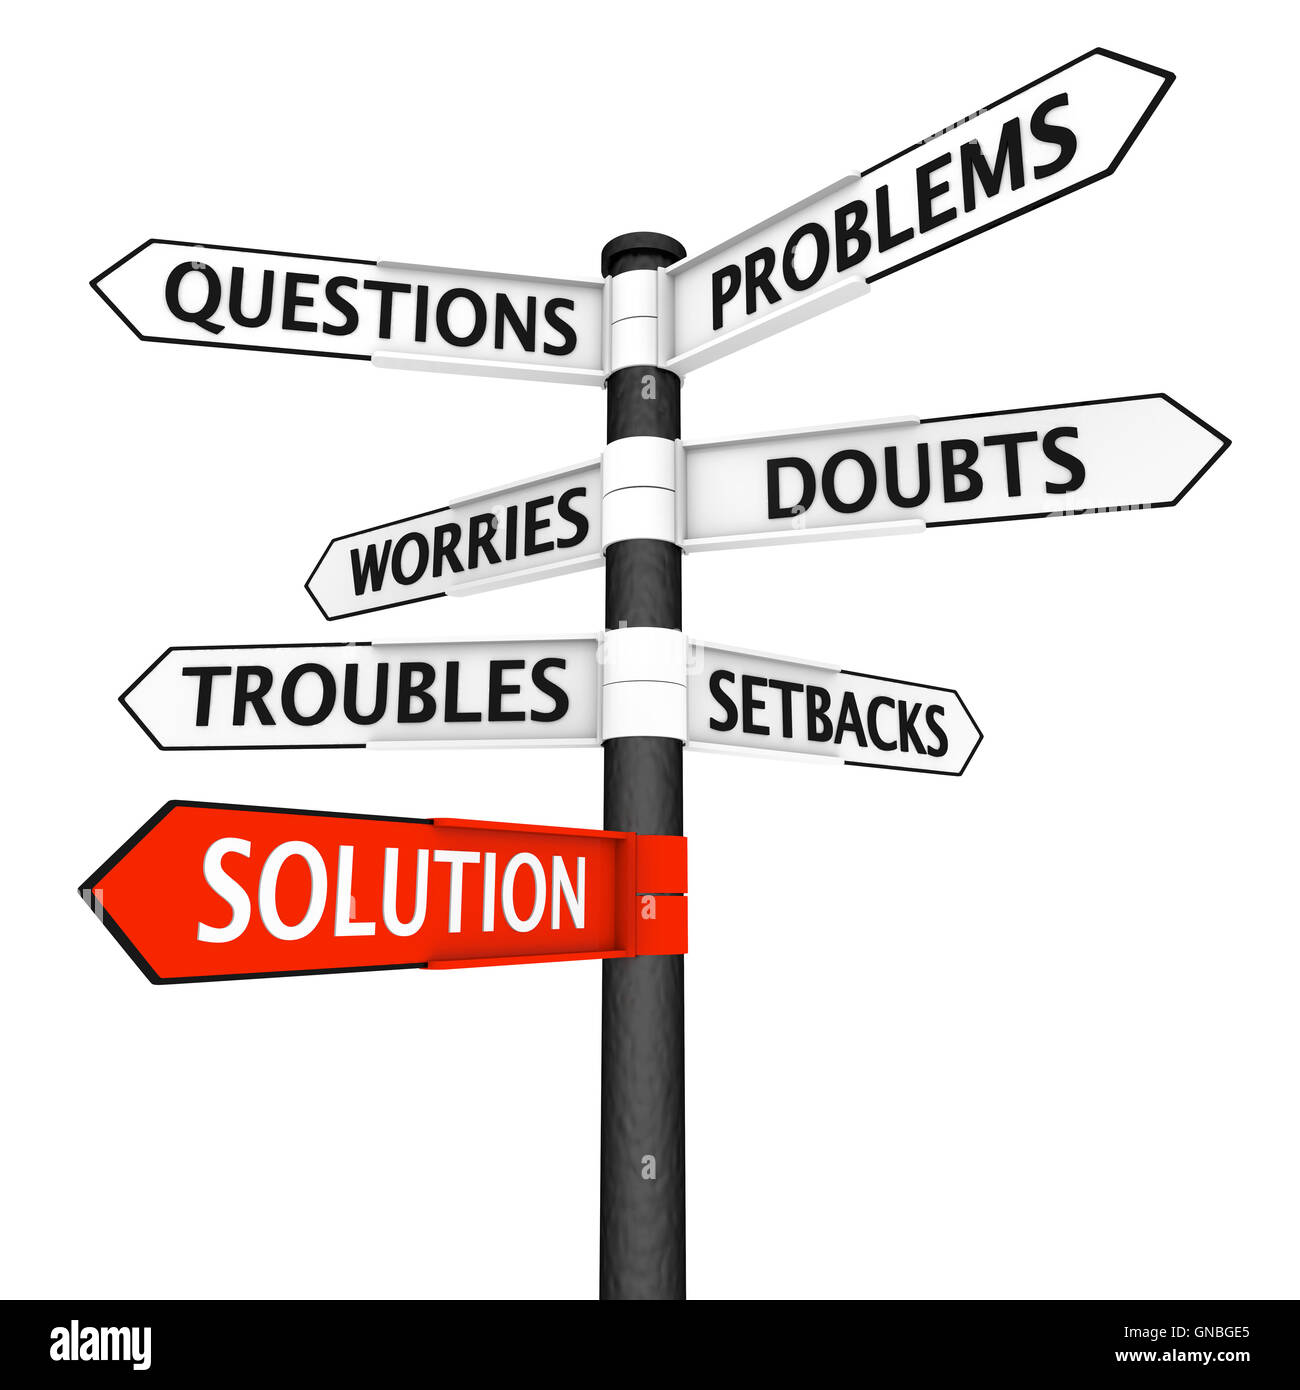 Problems and Solution Signpost Stock Photo